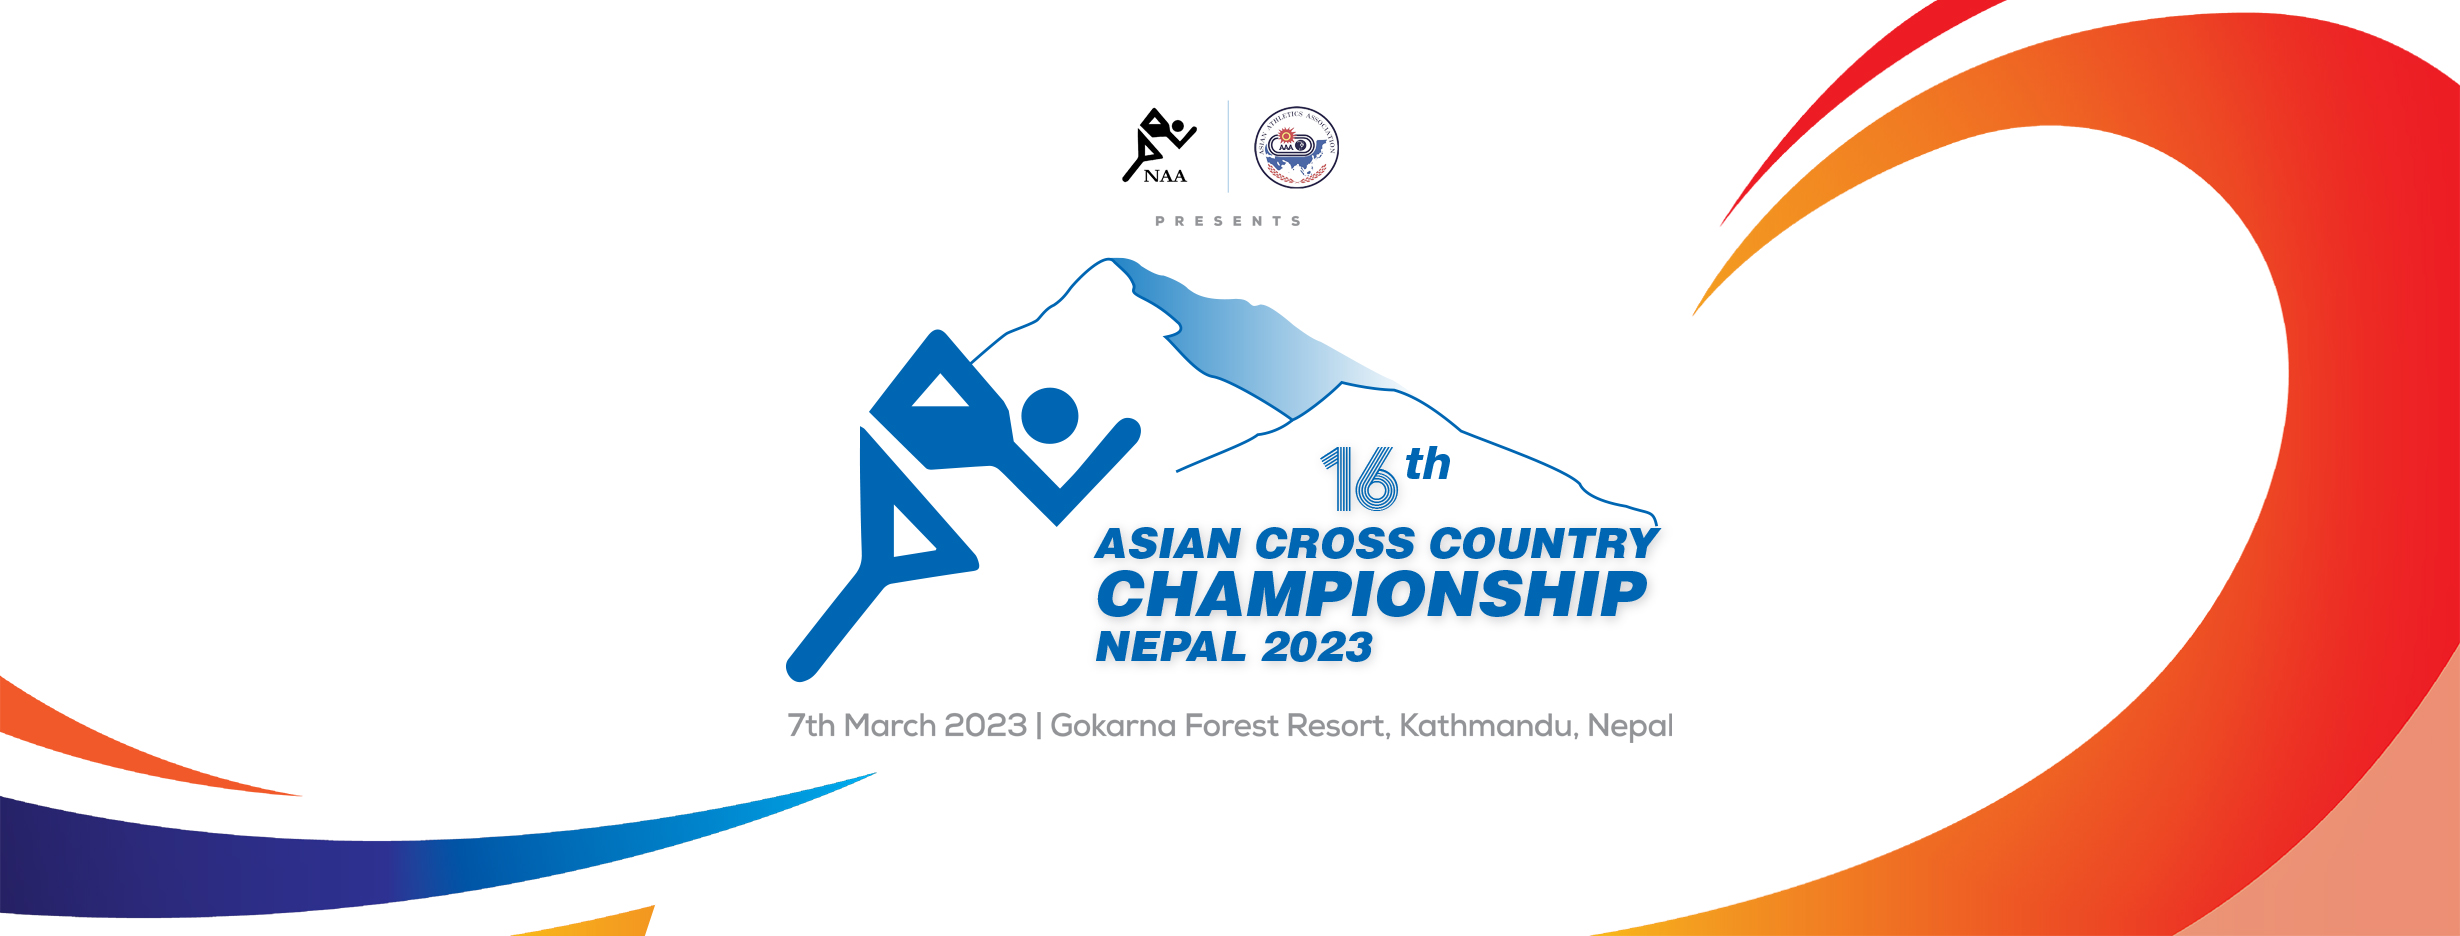 Nepal organizing 16th edition of Asian Cross Country Championship